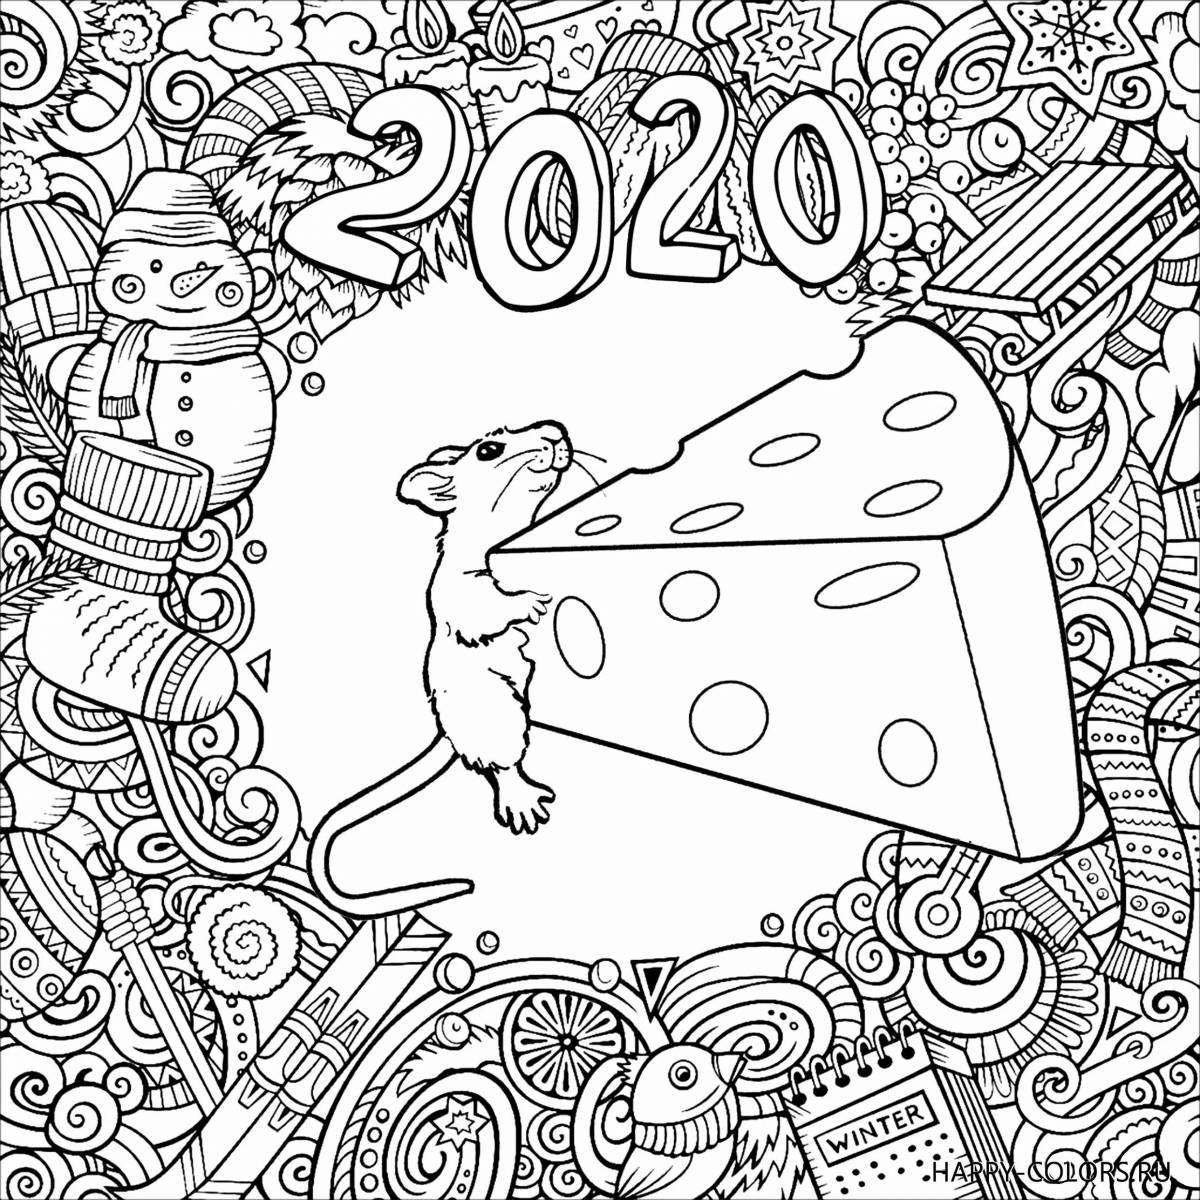 Bright new coloring pages